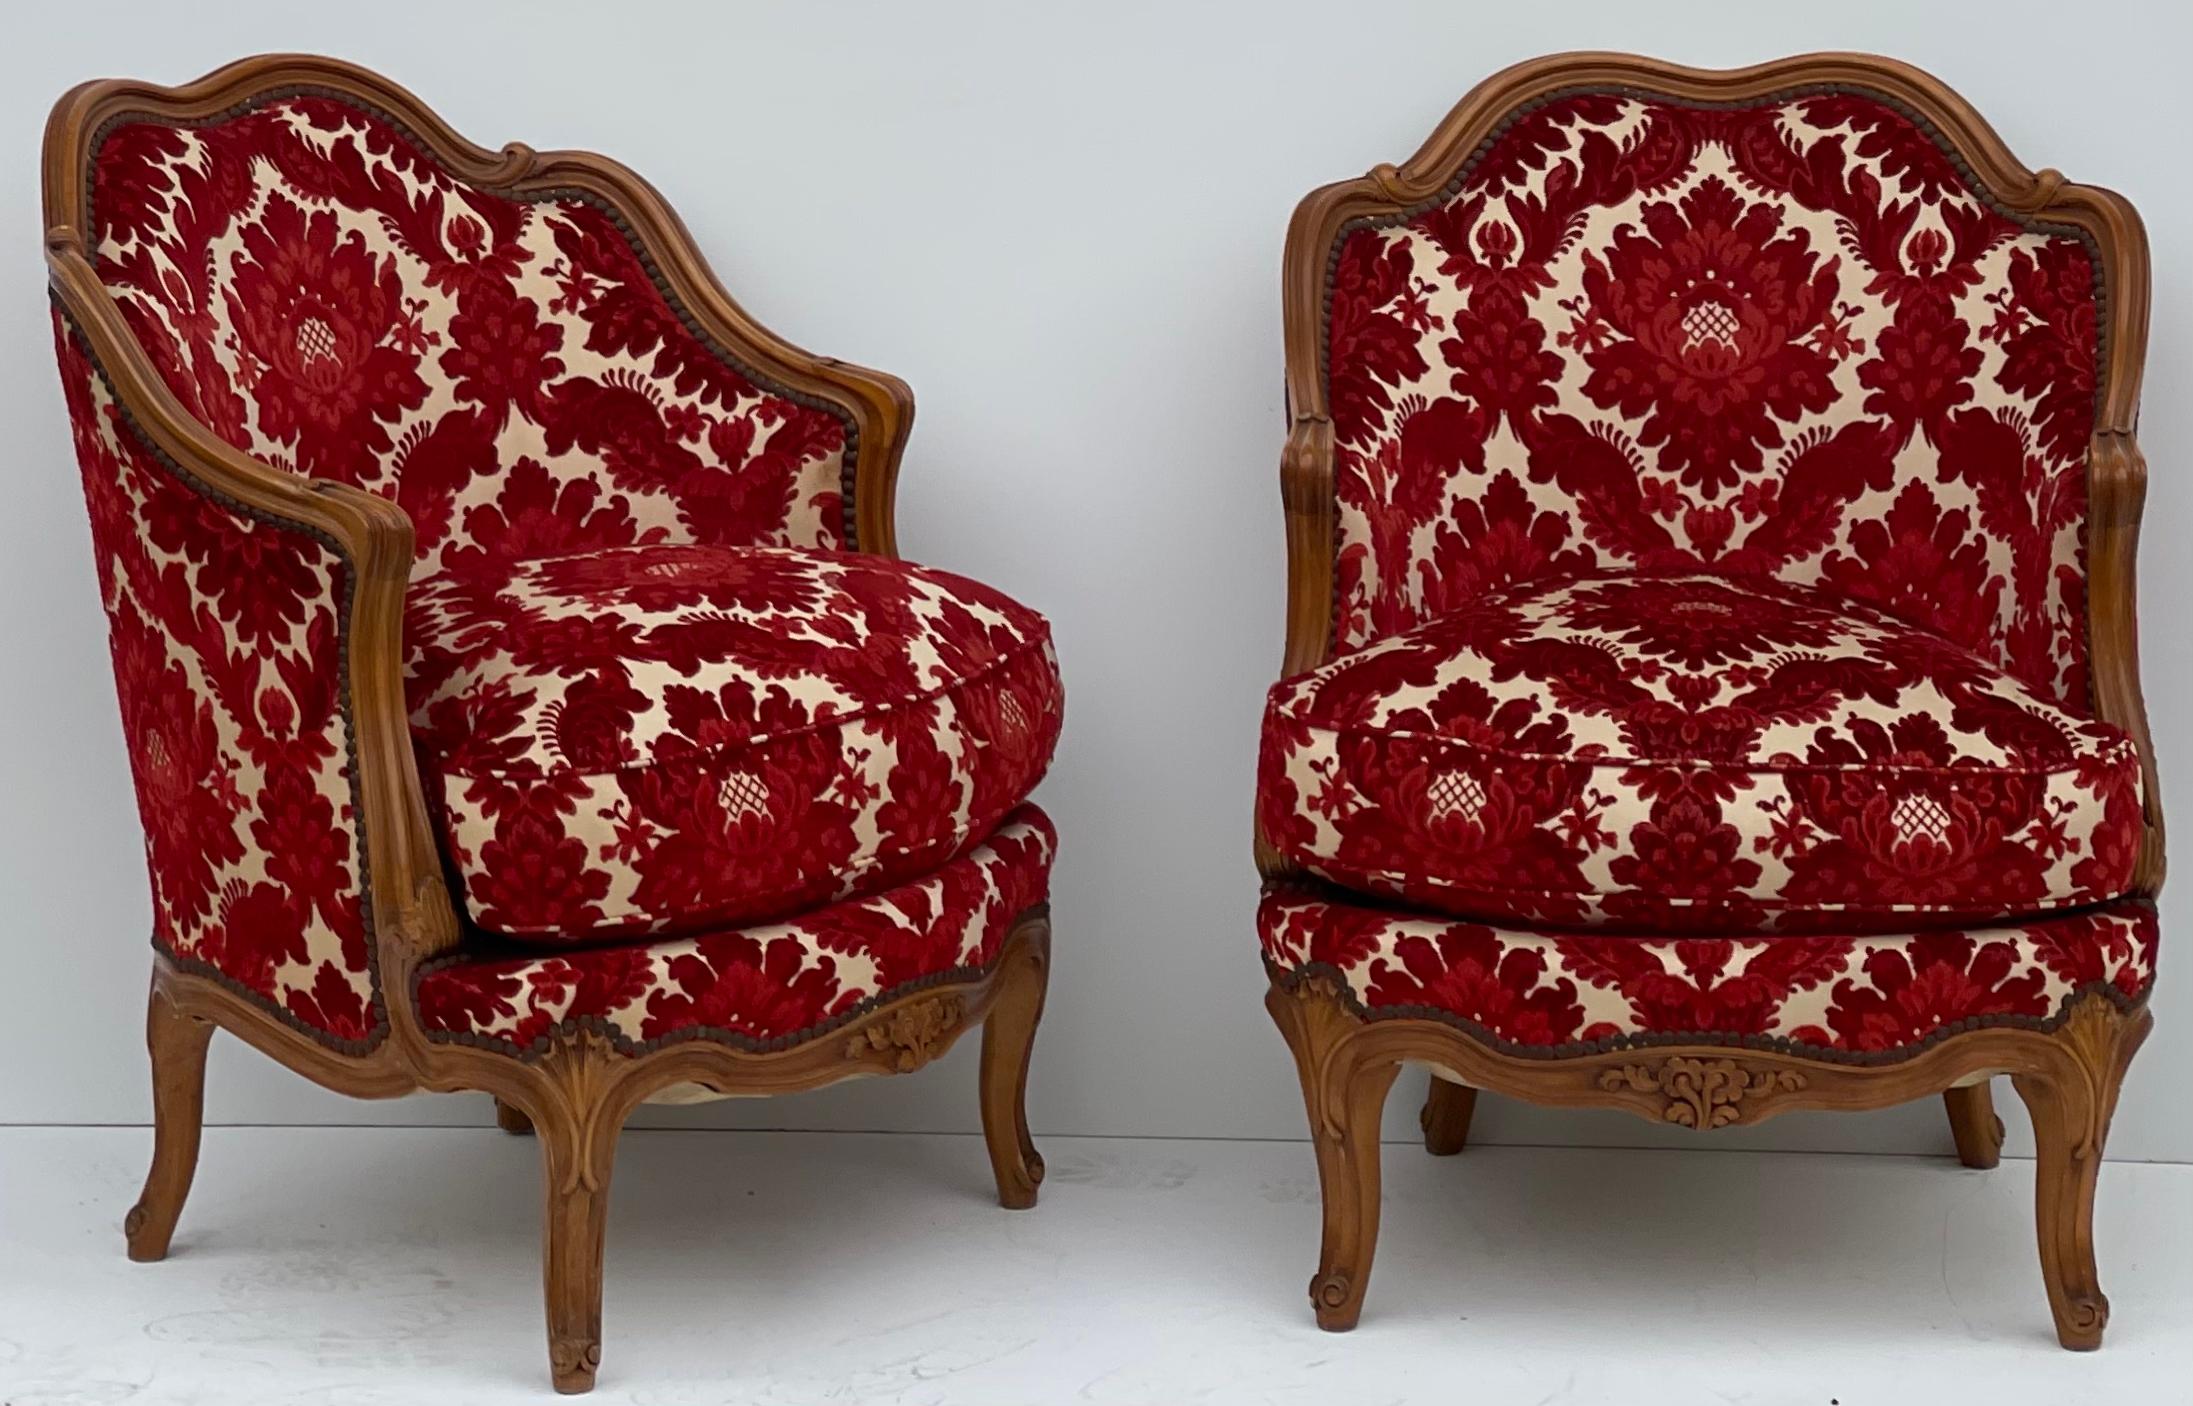 1930s French Carved Fruitwood Chairs in Red Cut Velvet Damask, Pair 1